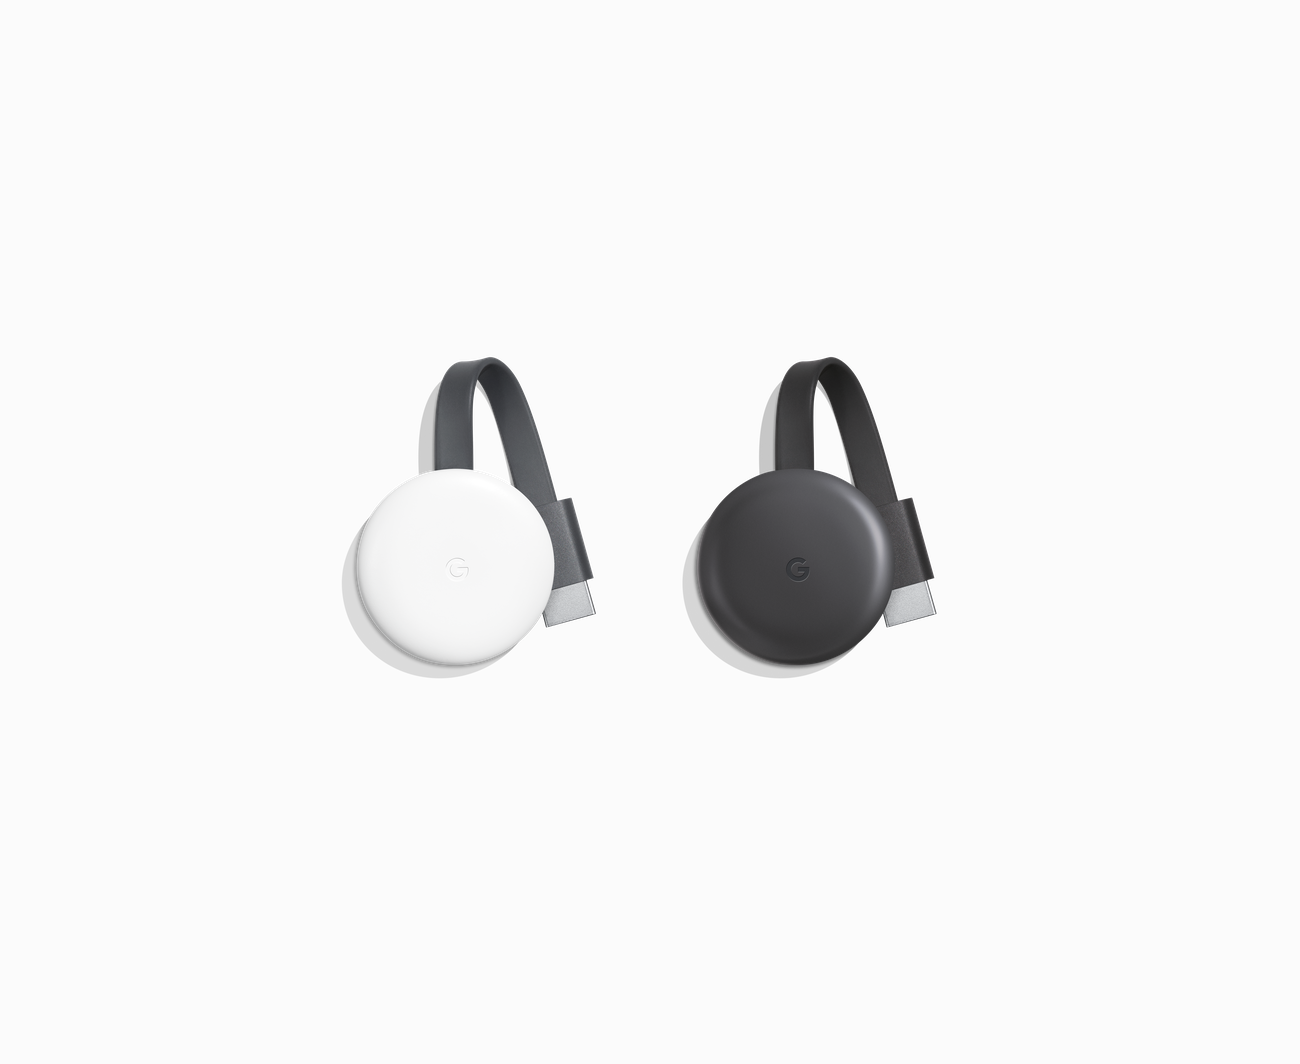 Five (and two colors) we the new Chromecast